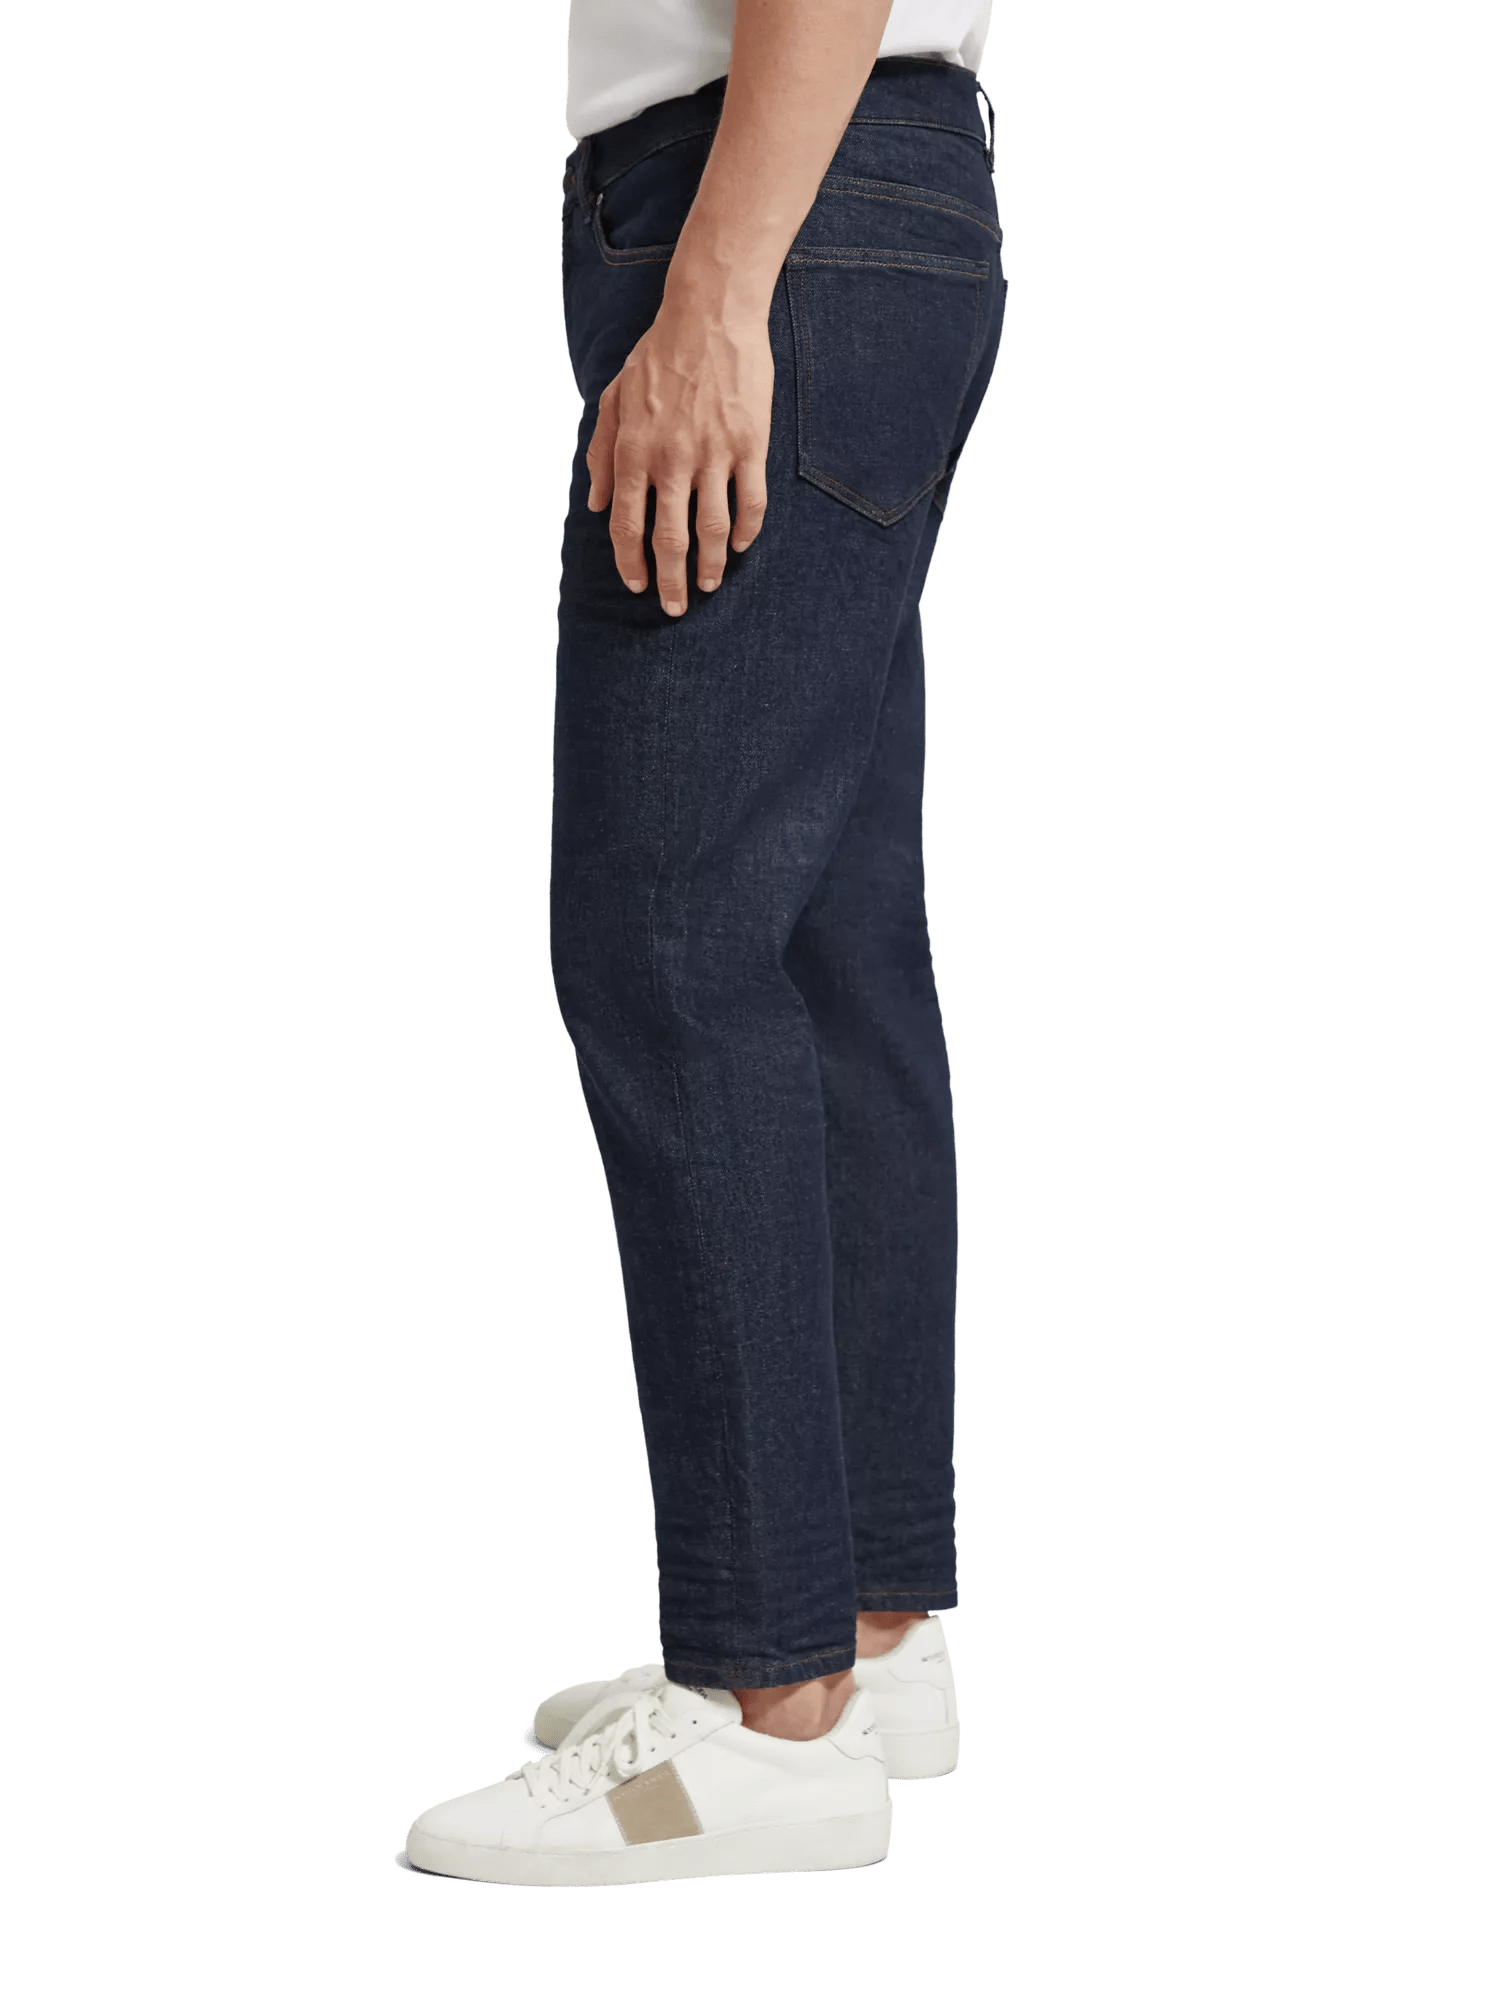 Scotch & Soda - The Drop Tapered Jean - Deep Ink